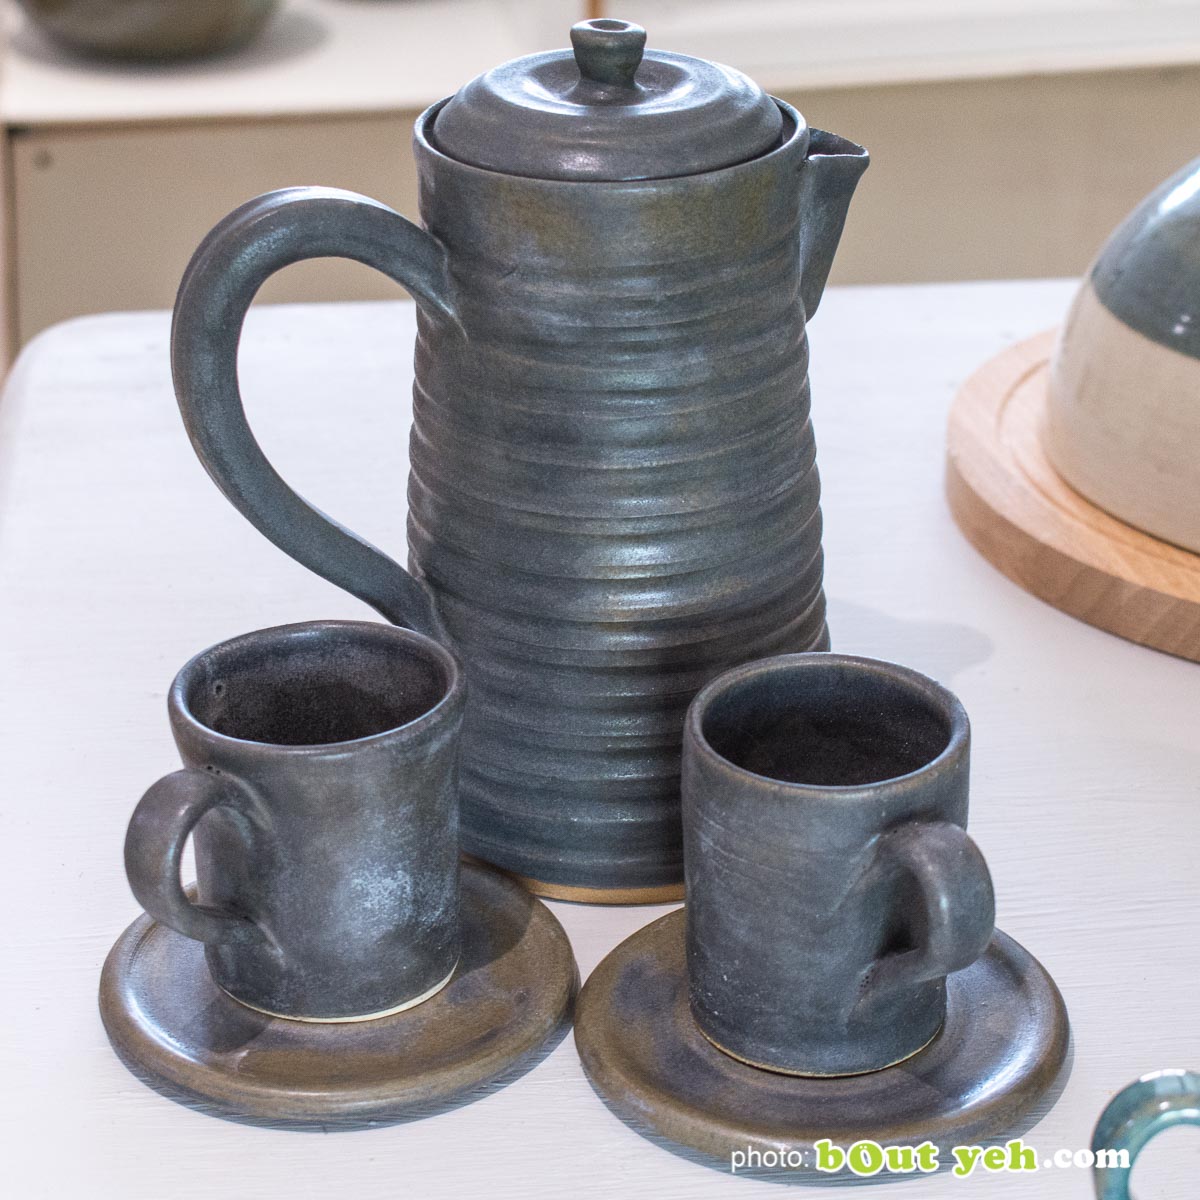 Rustic charcoal grey coffee pot and mugs for sale - photo 1447